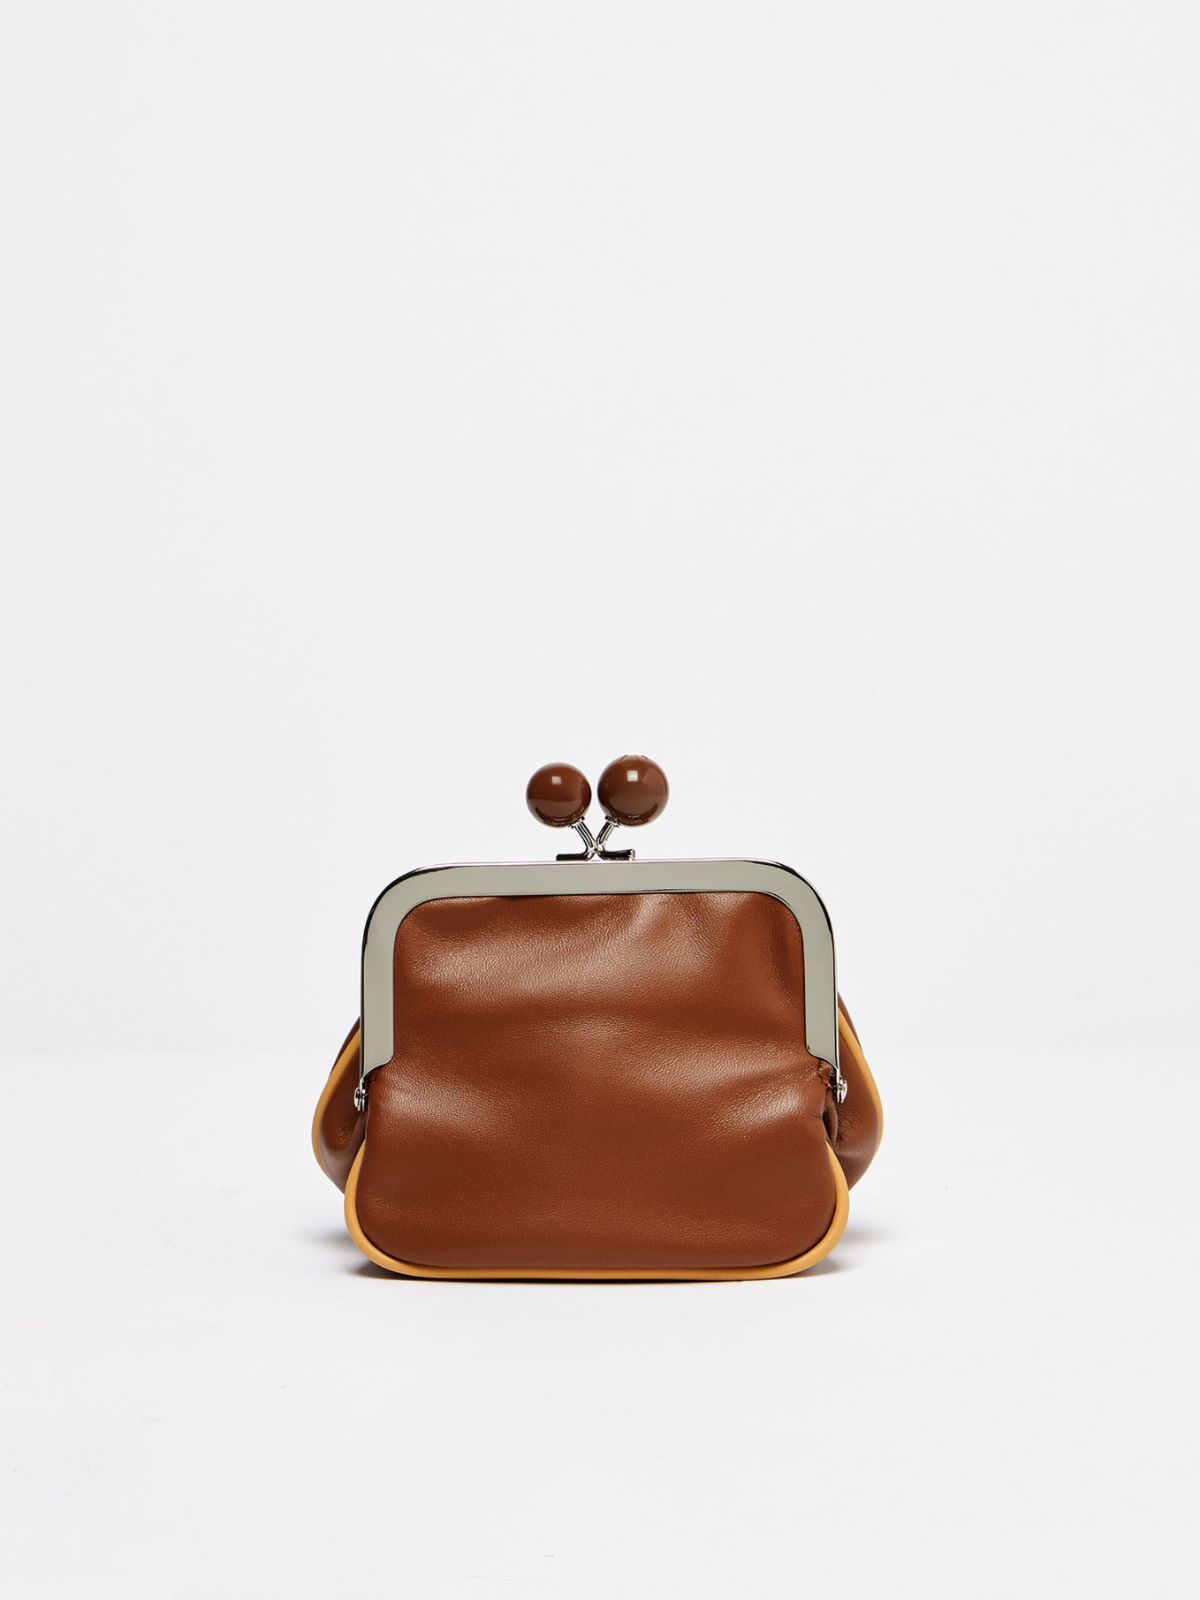 Extra Small Pasticcino Bag in nappa leather  - TOBACCO - Weekend Max Mara - 3